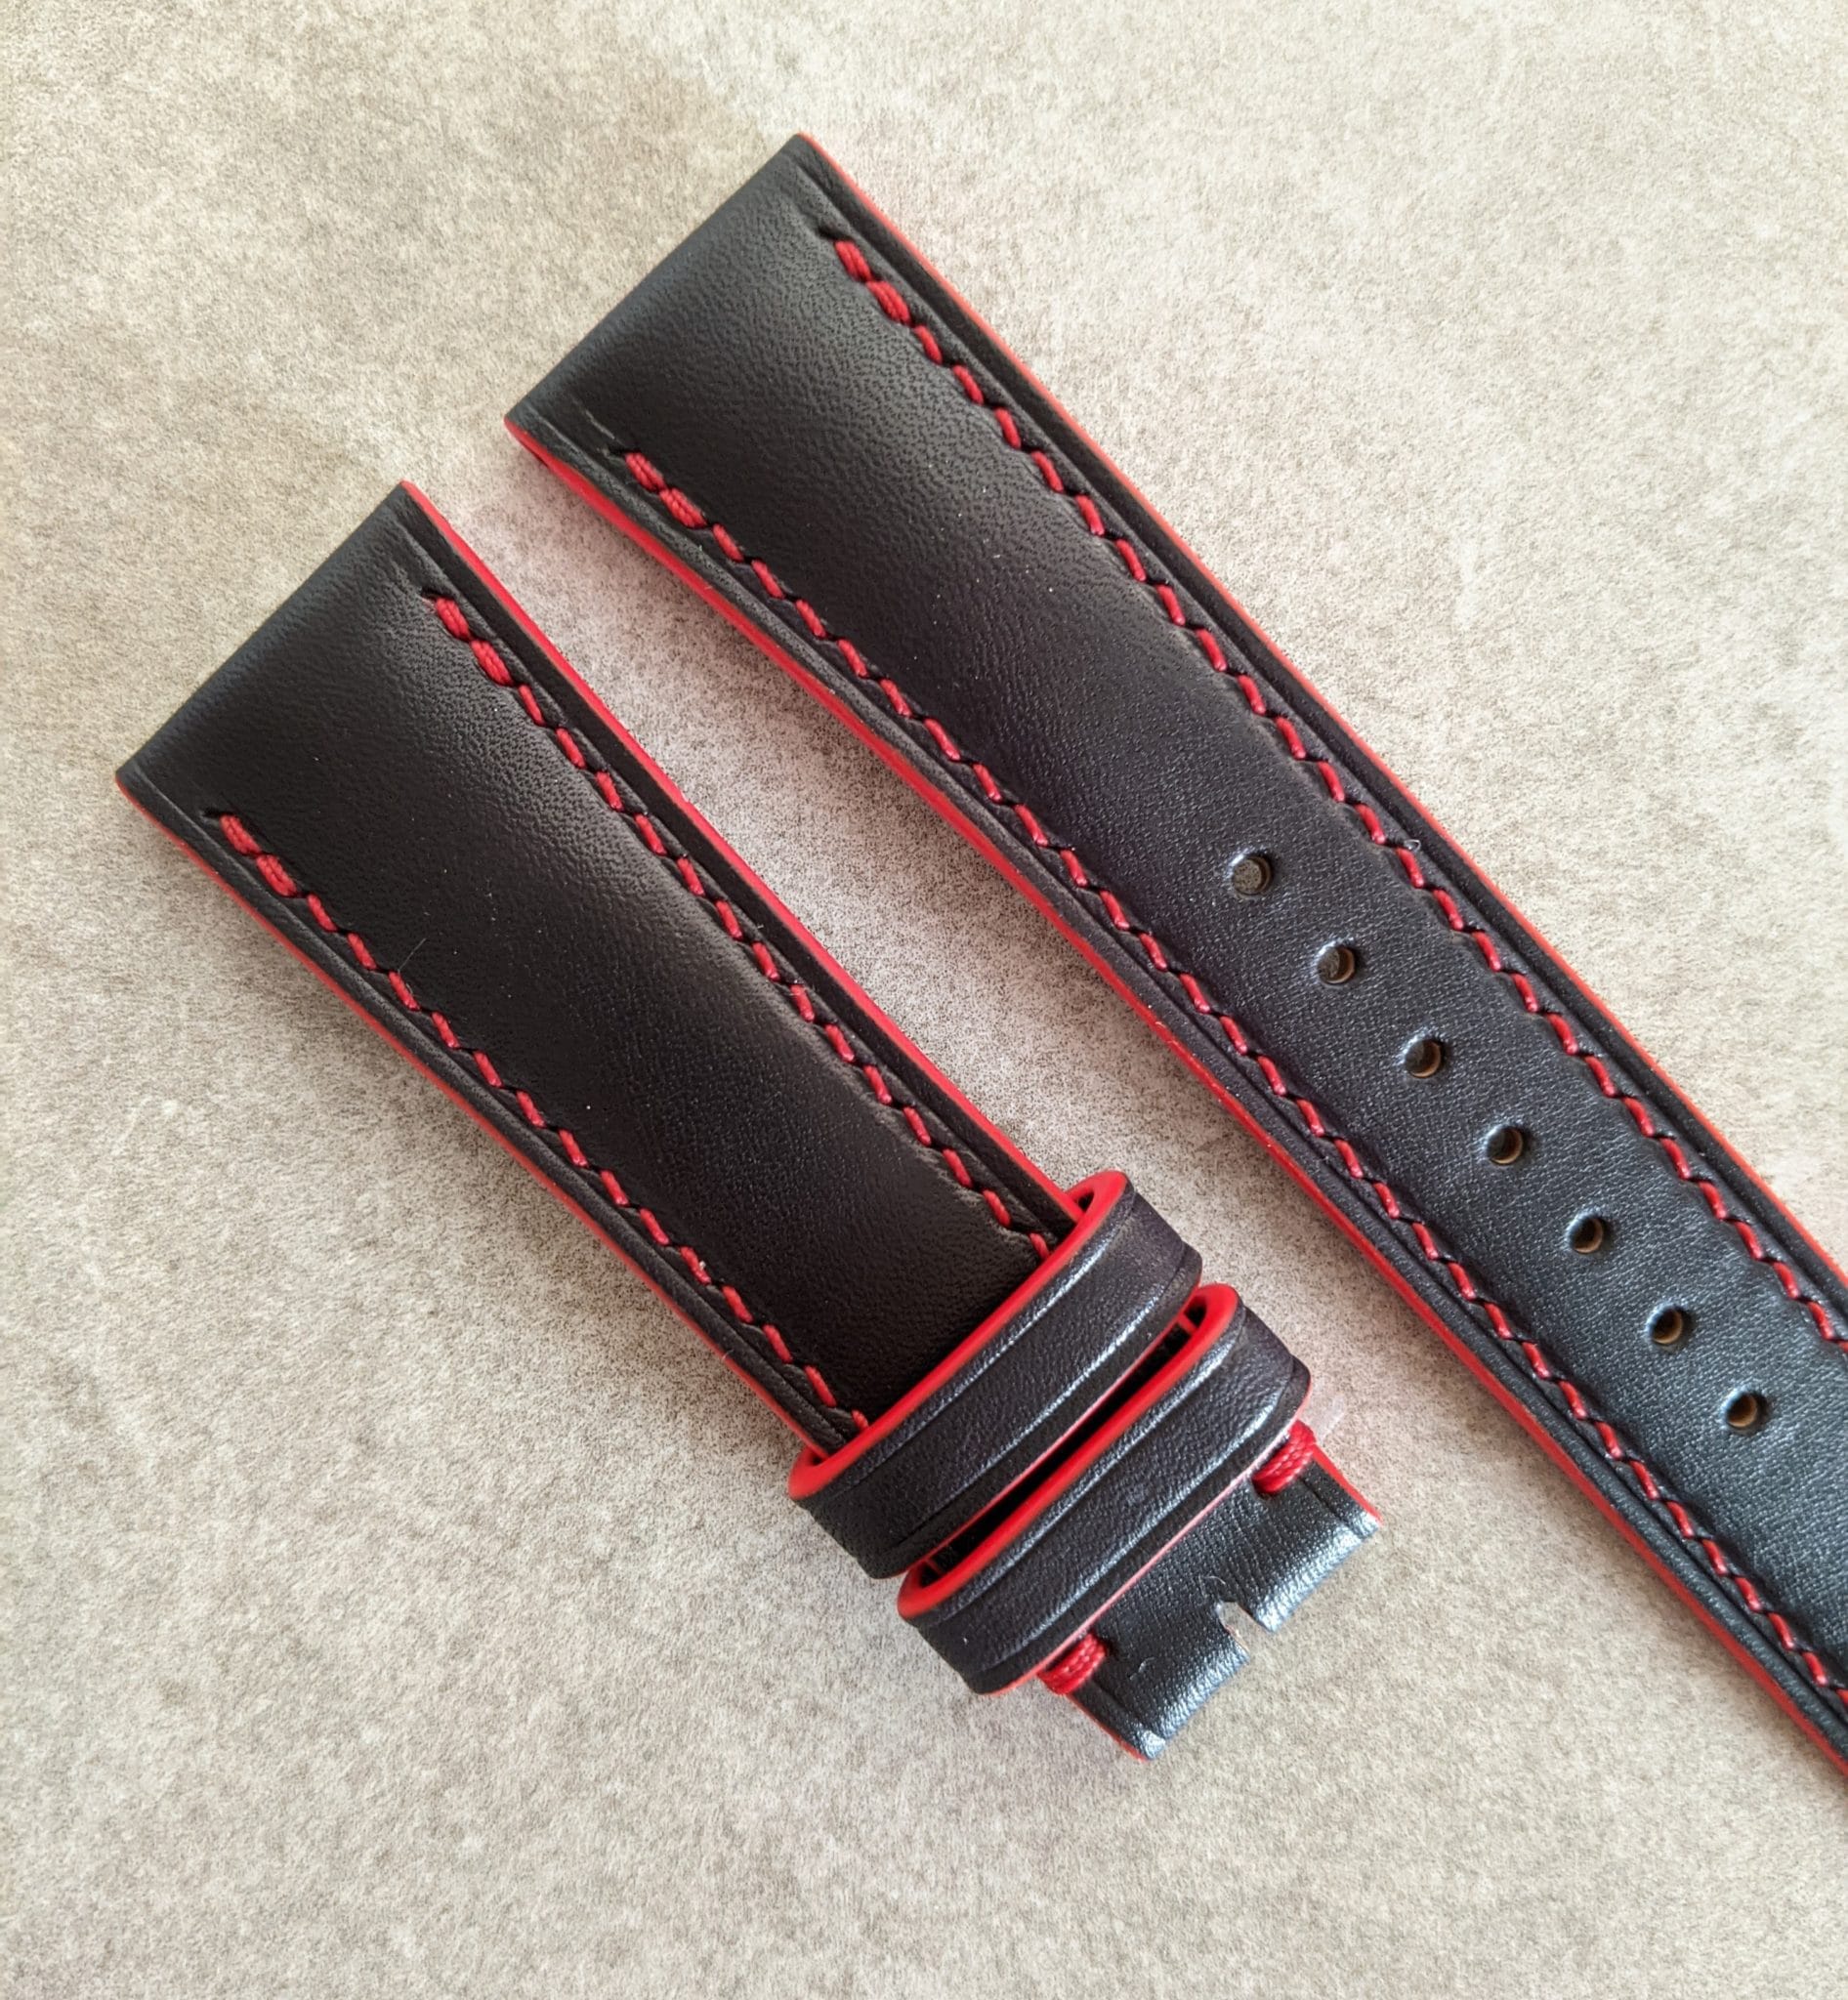 French Calfskin Watch Strap - Black & Rage Red - The Strap Tailor